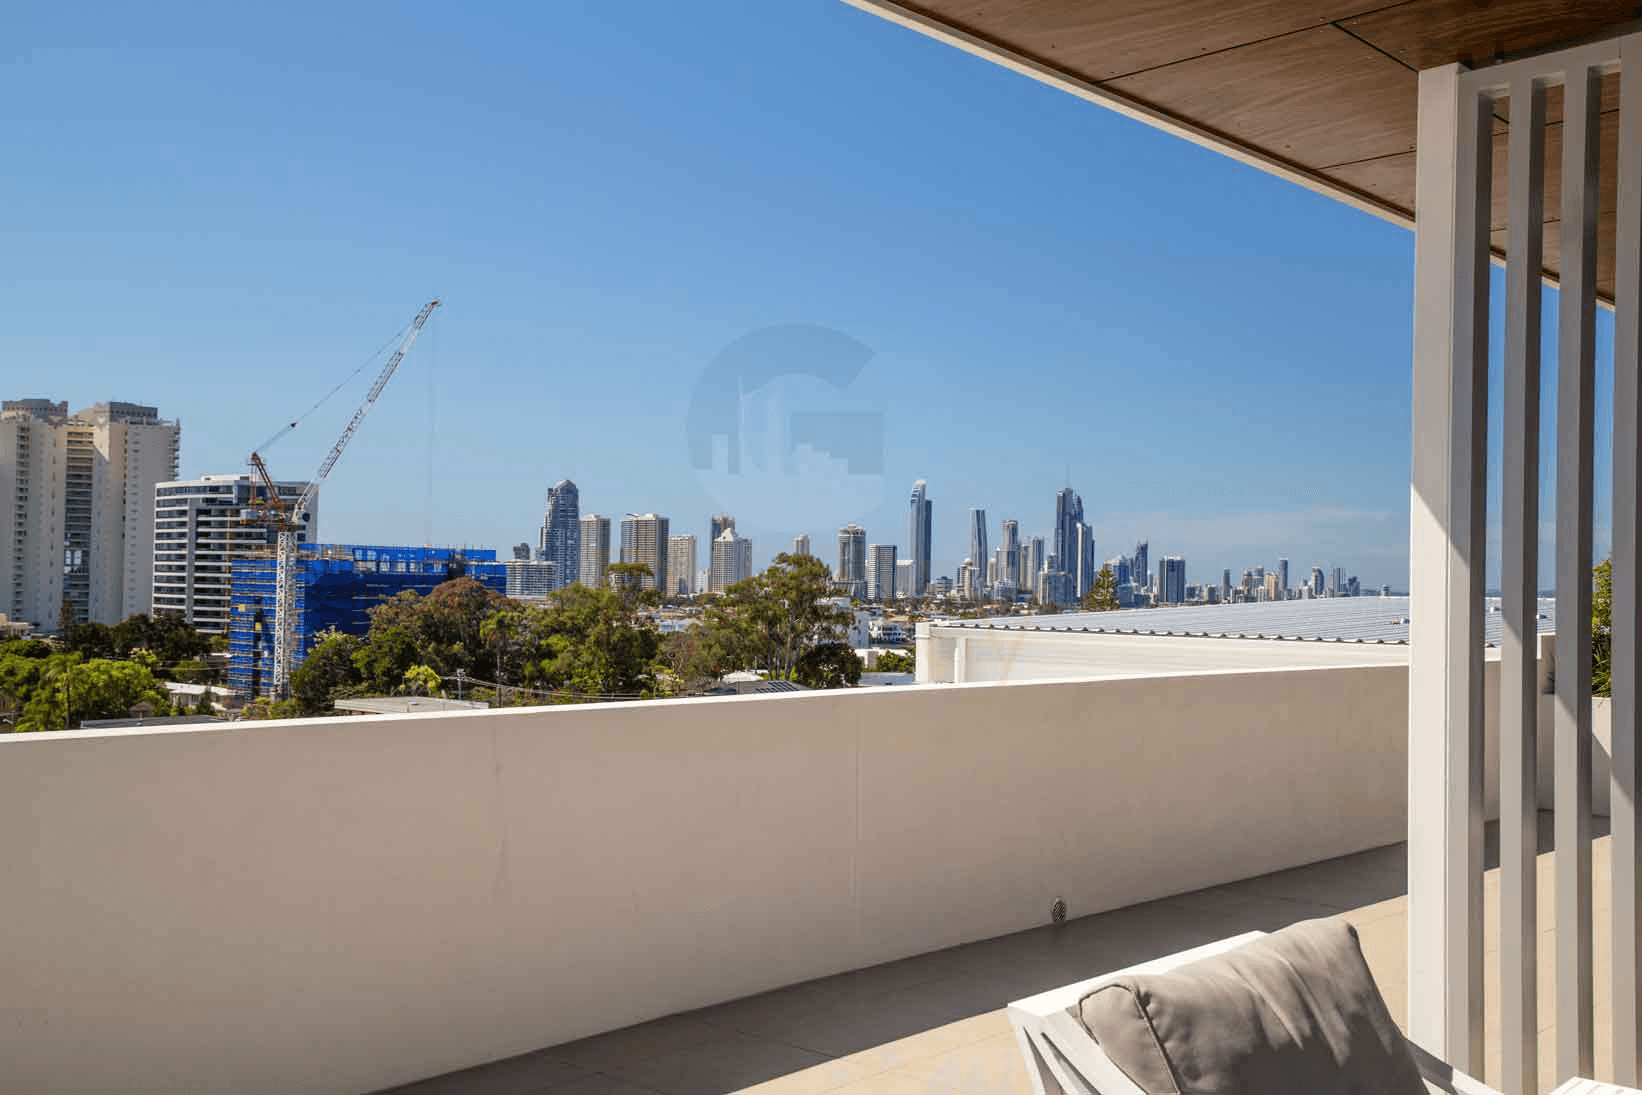 404/11 Andrews Street, SOUTHPORT, QLD 4215